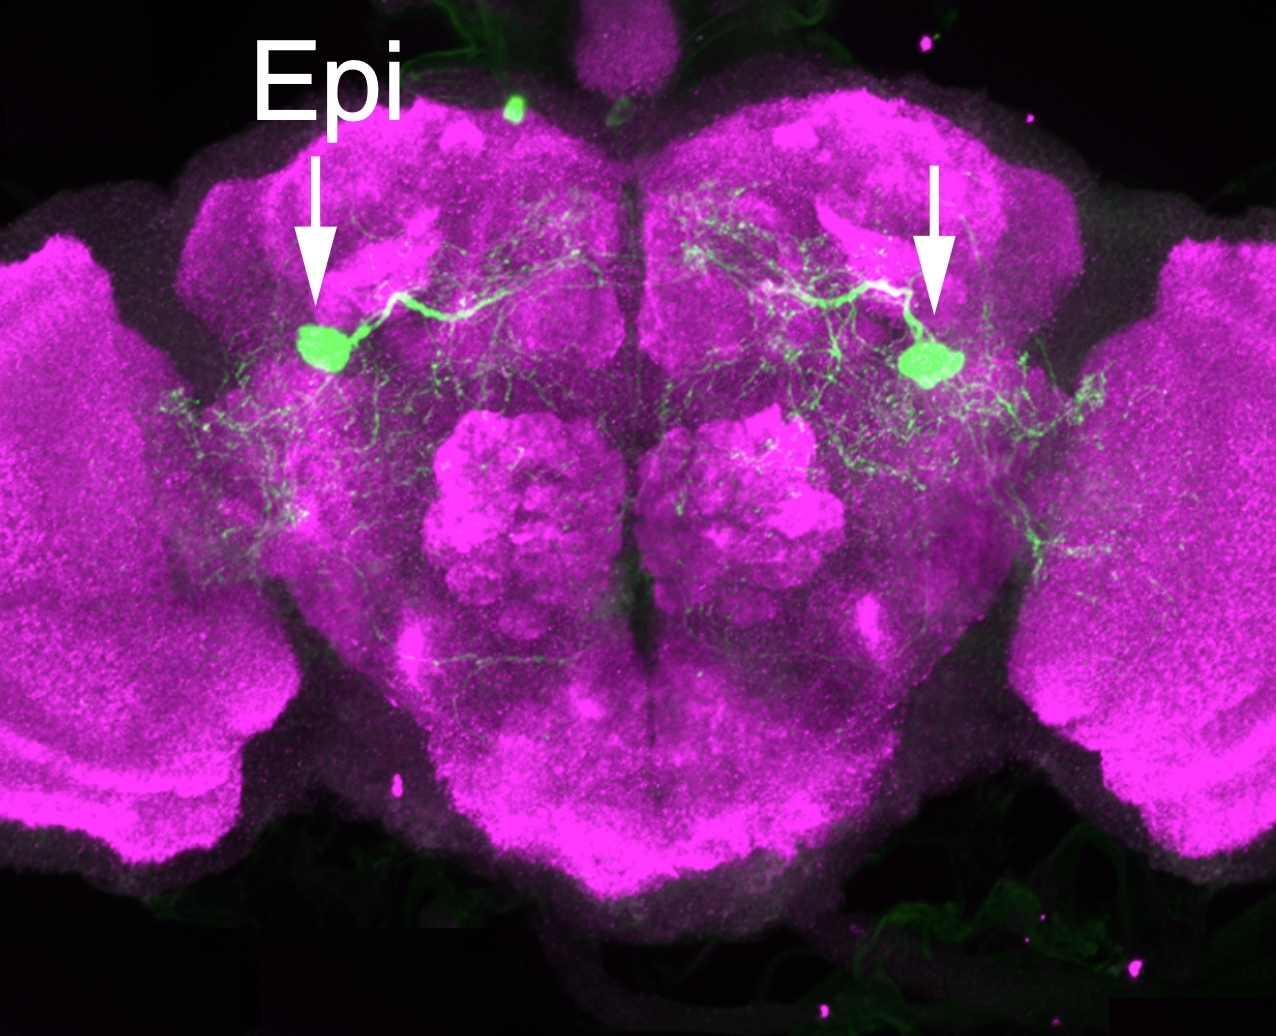 Epi neurons in a fly's brain, highlighted by fluorescence